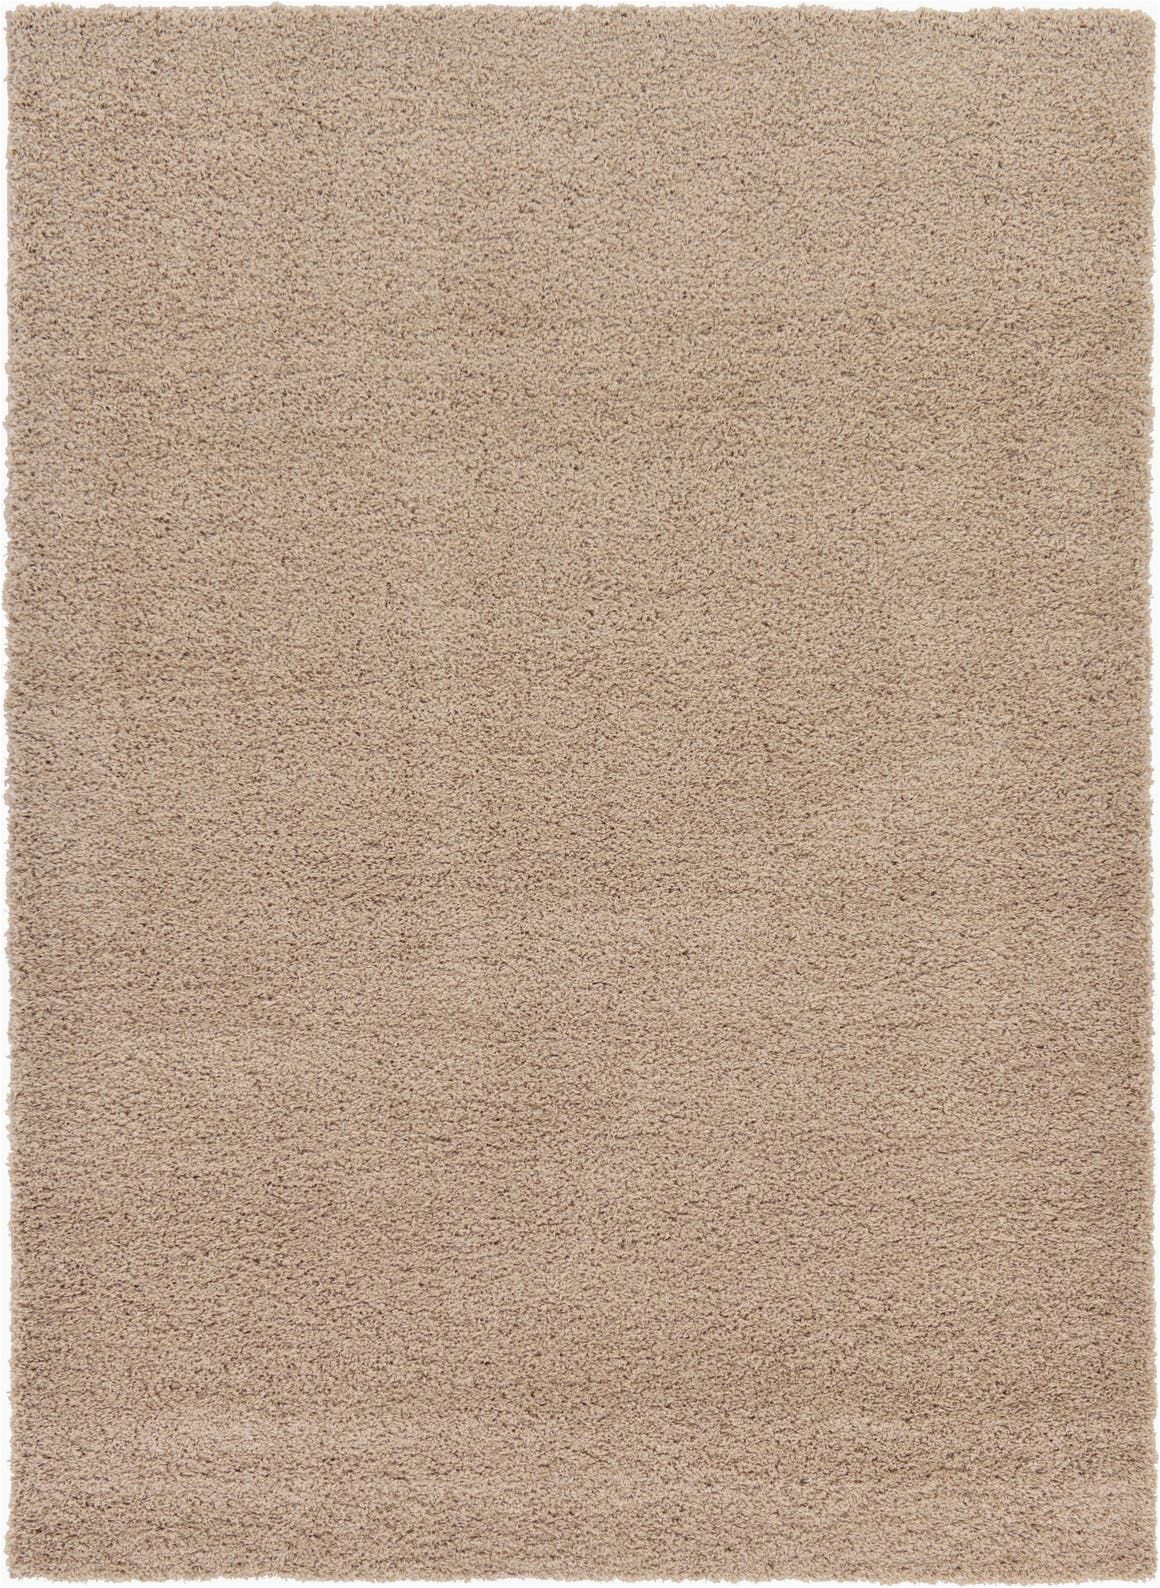 Menards area Rugs 9 X 12 Taupe solid Shag area Rug In 2020